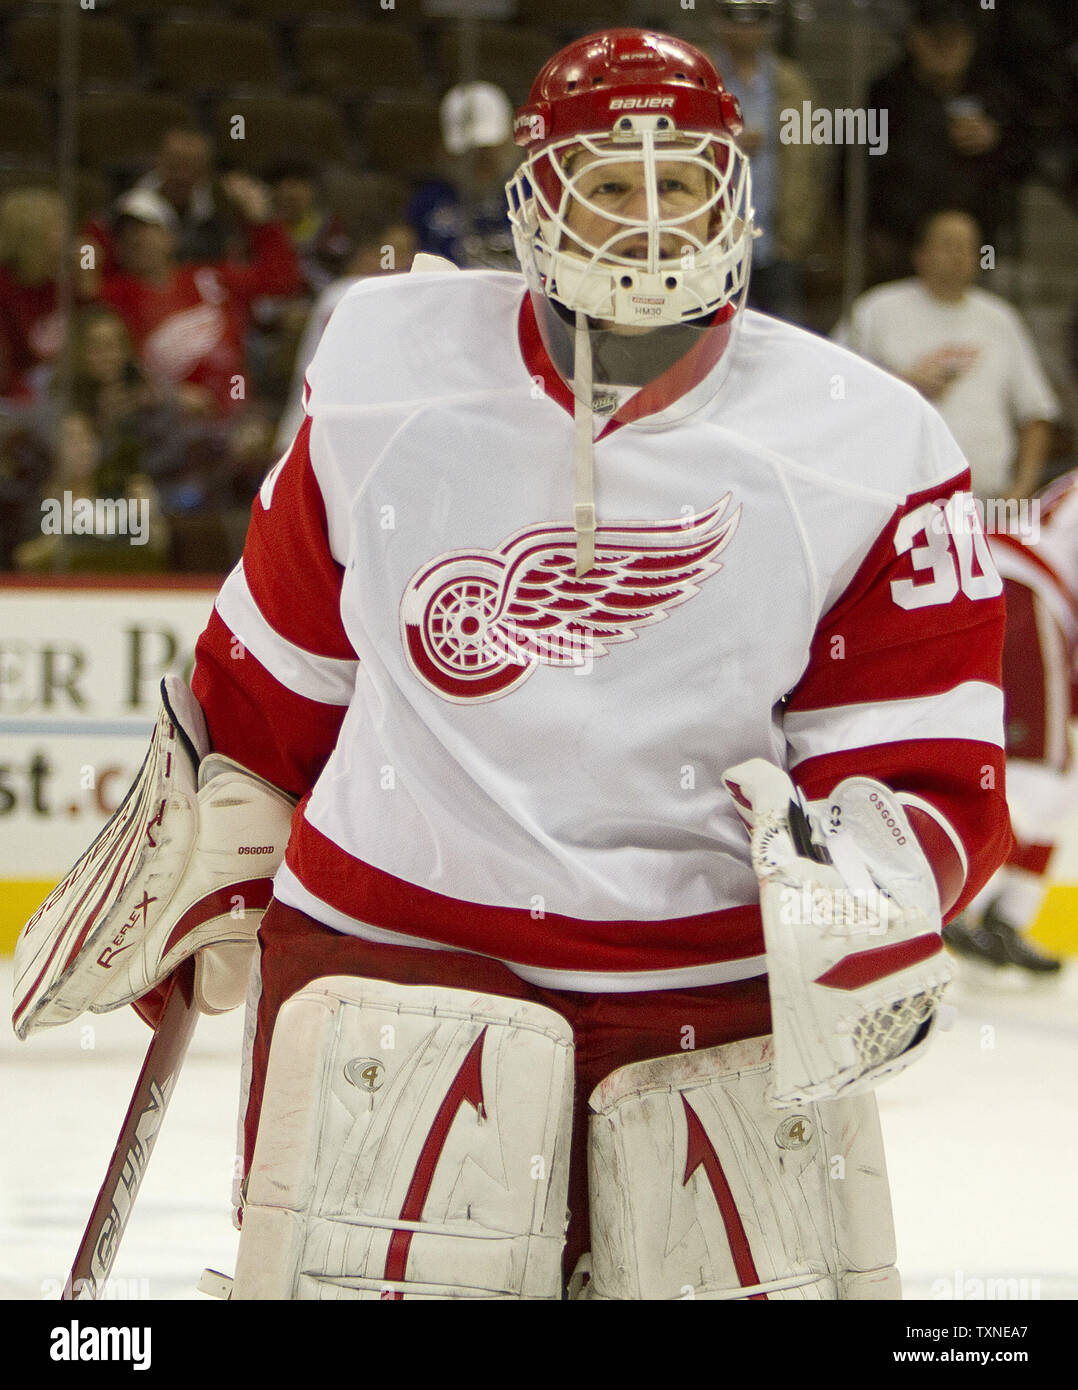 Detroit Red Wings goalie Chris Osgood skates during warm ups at the Pepsi  Center in Denver on February 18, 2008. Osgood and the Red Wings shut out  the Colorado Avalanche 4-0 stopping